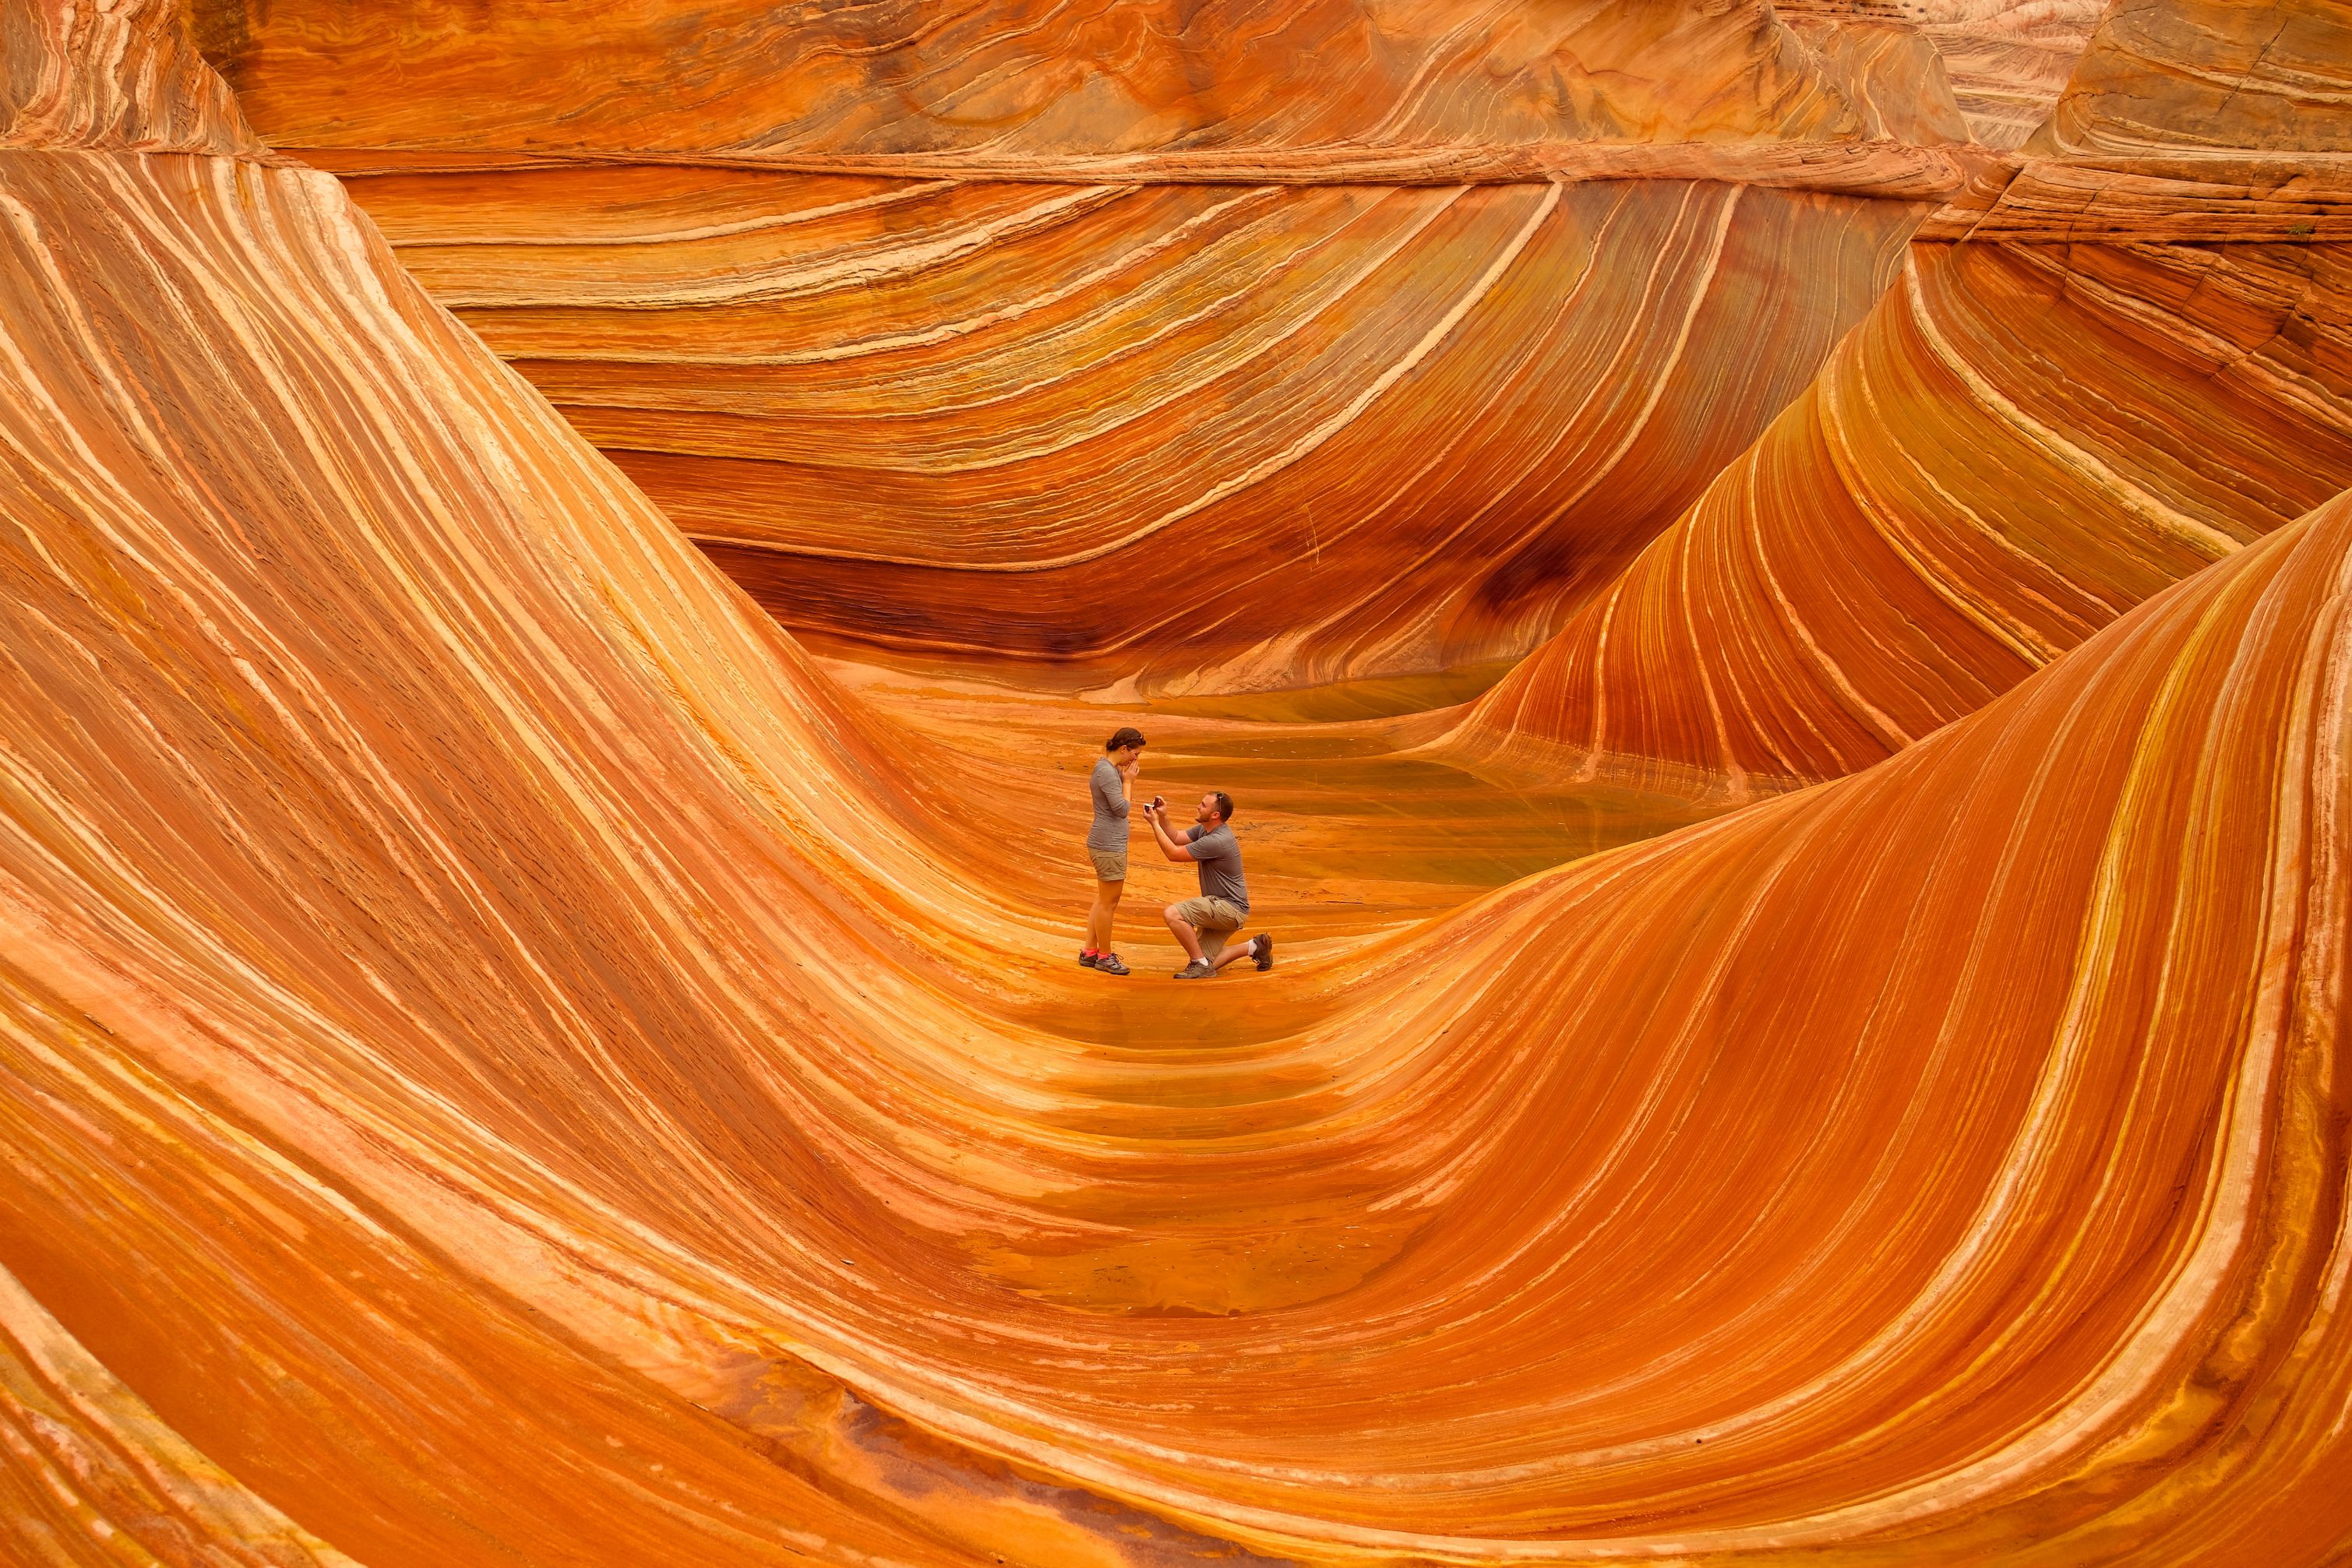 cool pic coyote buttes, the wave